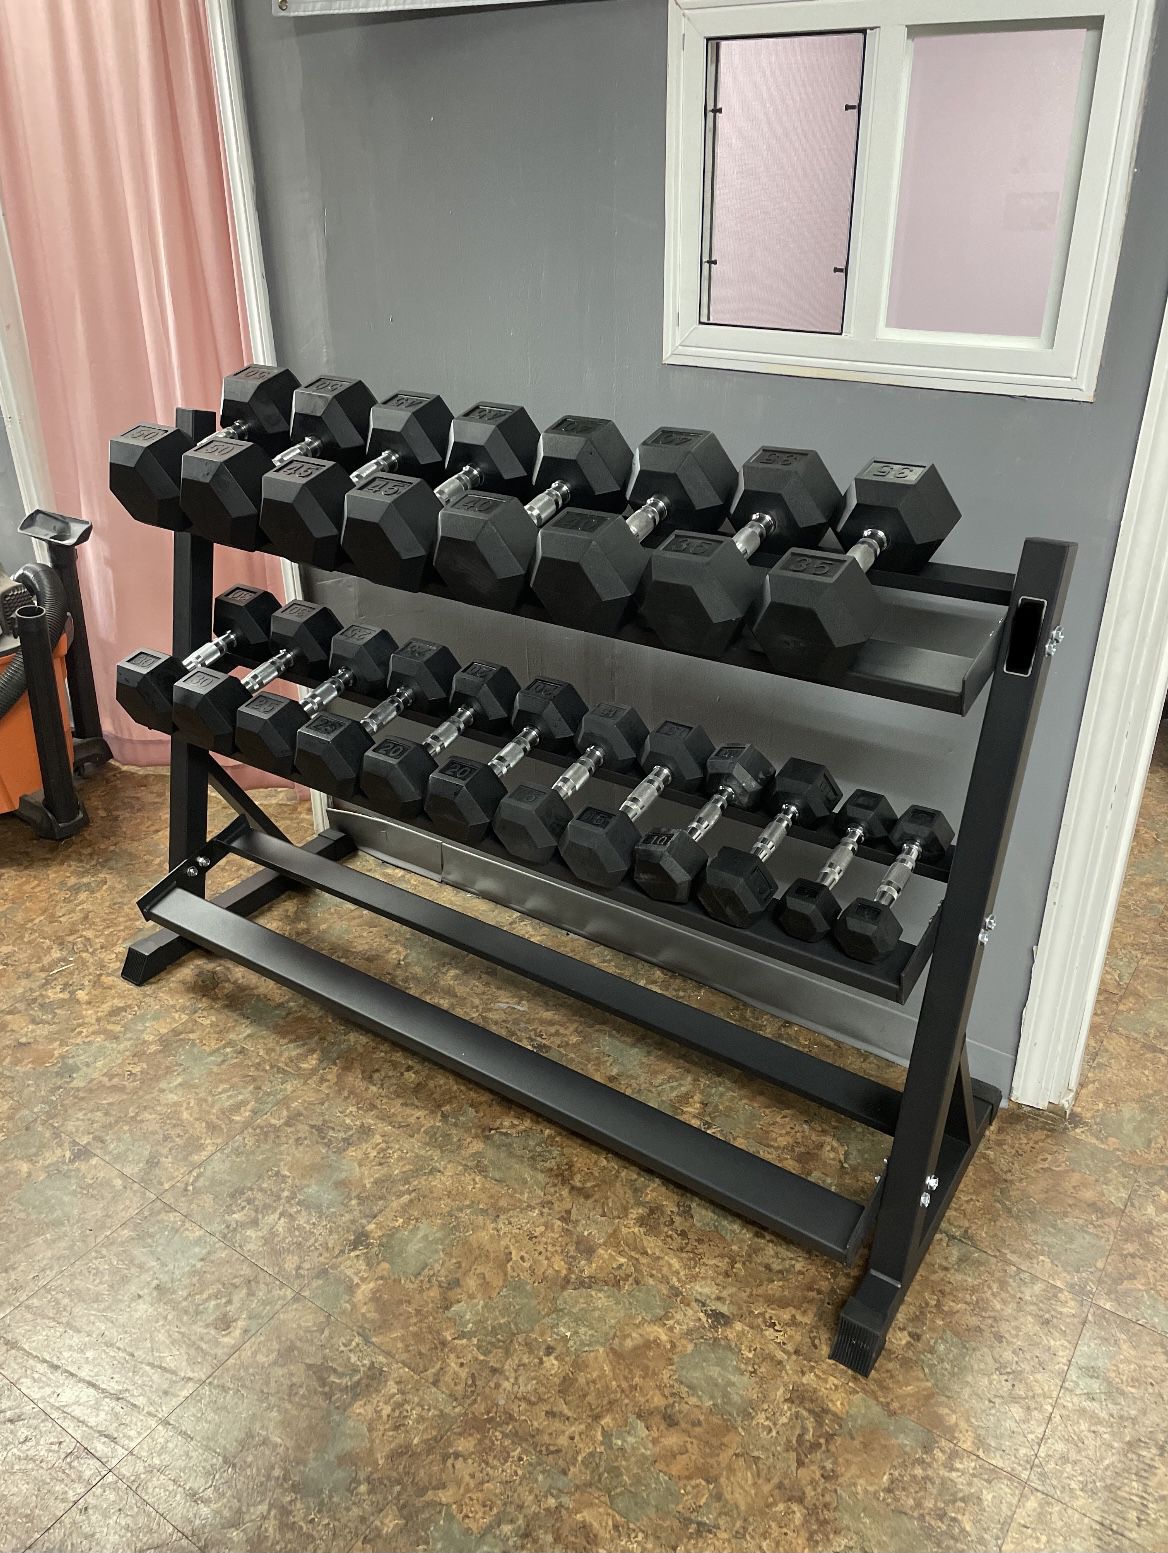 Brand New 5-50lb Rubber Hex Dumbbell Set With 3 Tier Dumbbell Rack; DELIVERY Is Available 🚚 CHECK DESCRIPTION FOR PRICE